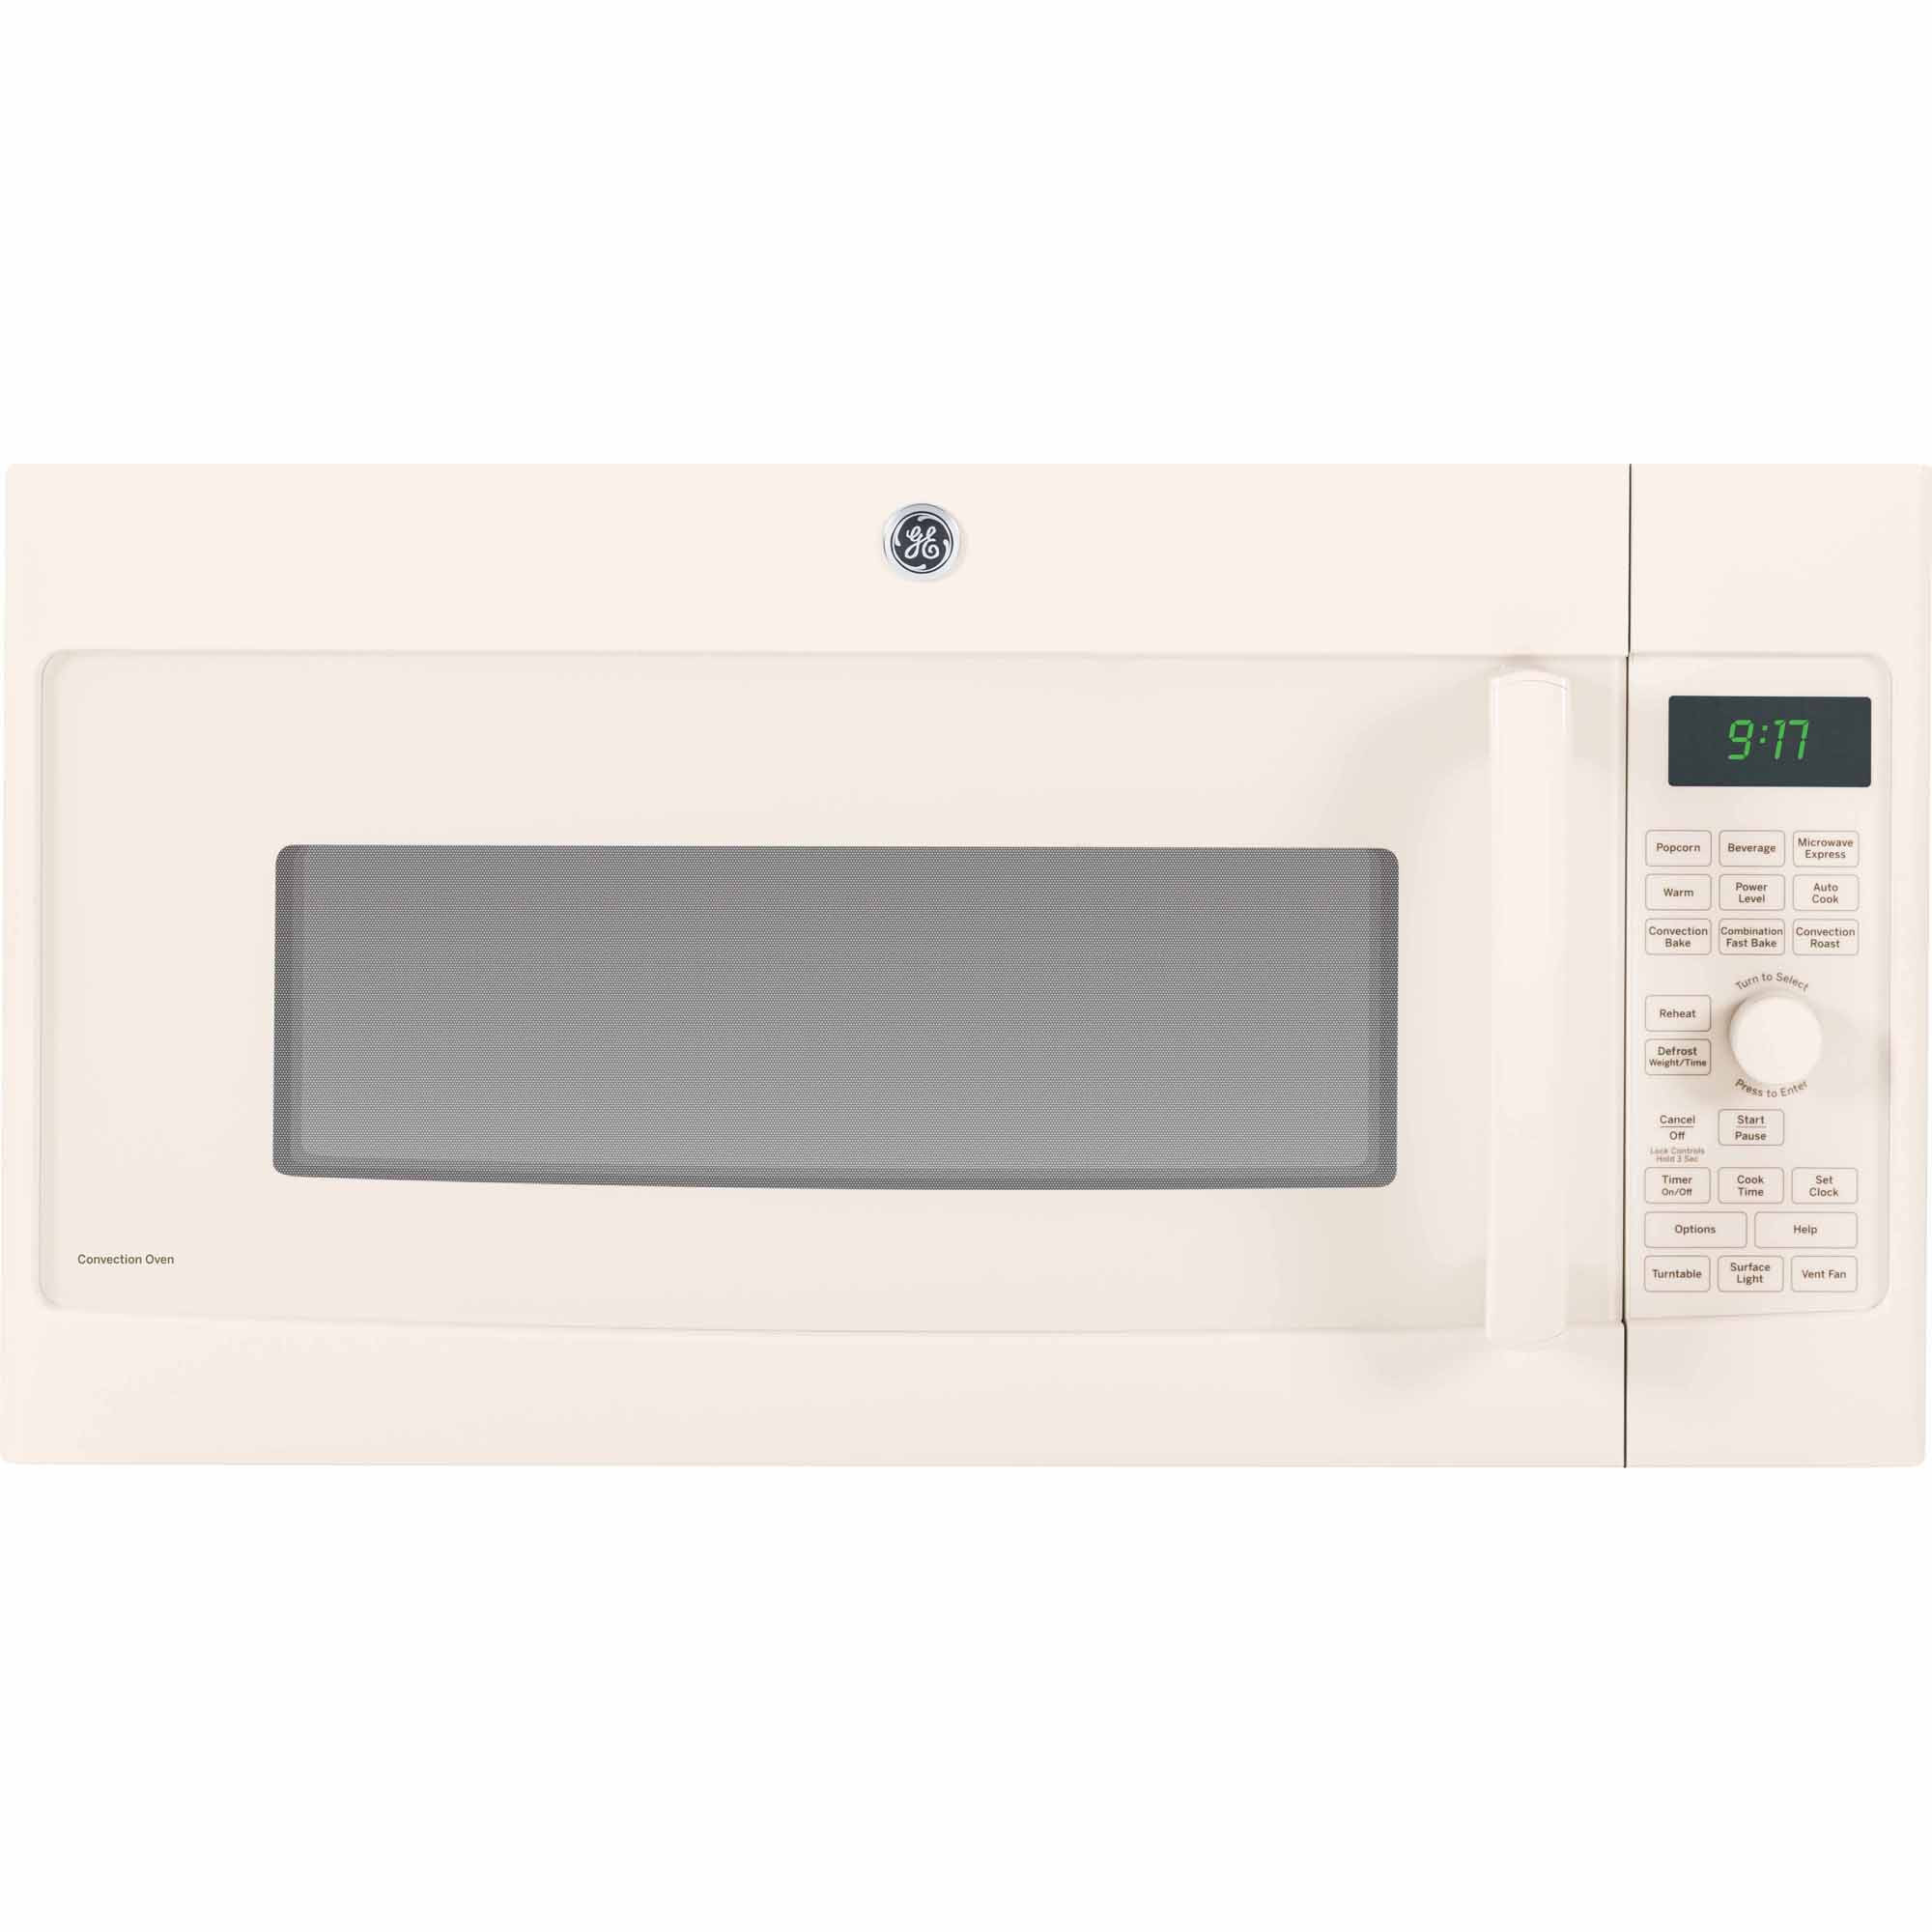 Over The Range Microwave Bisque
 GE Profile PVM9179DFCC 1 7 cu ft Over the Range